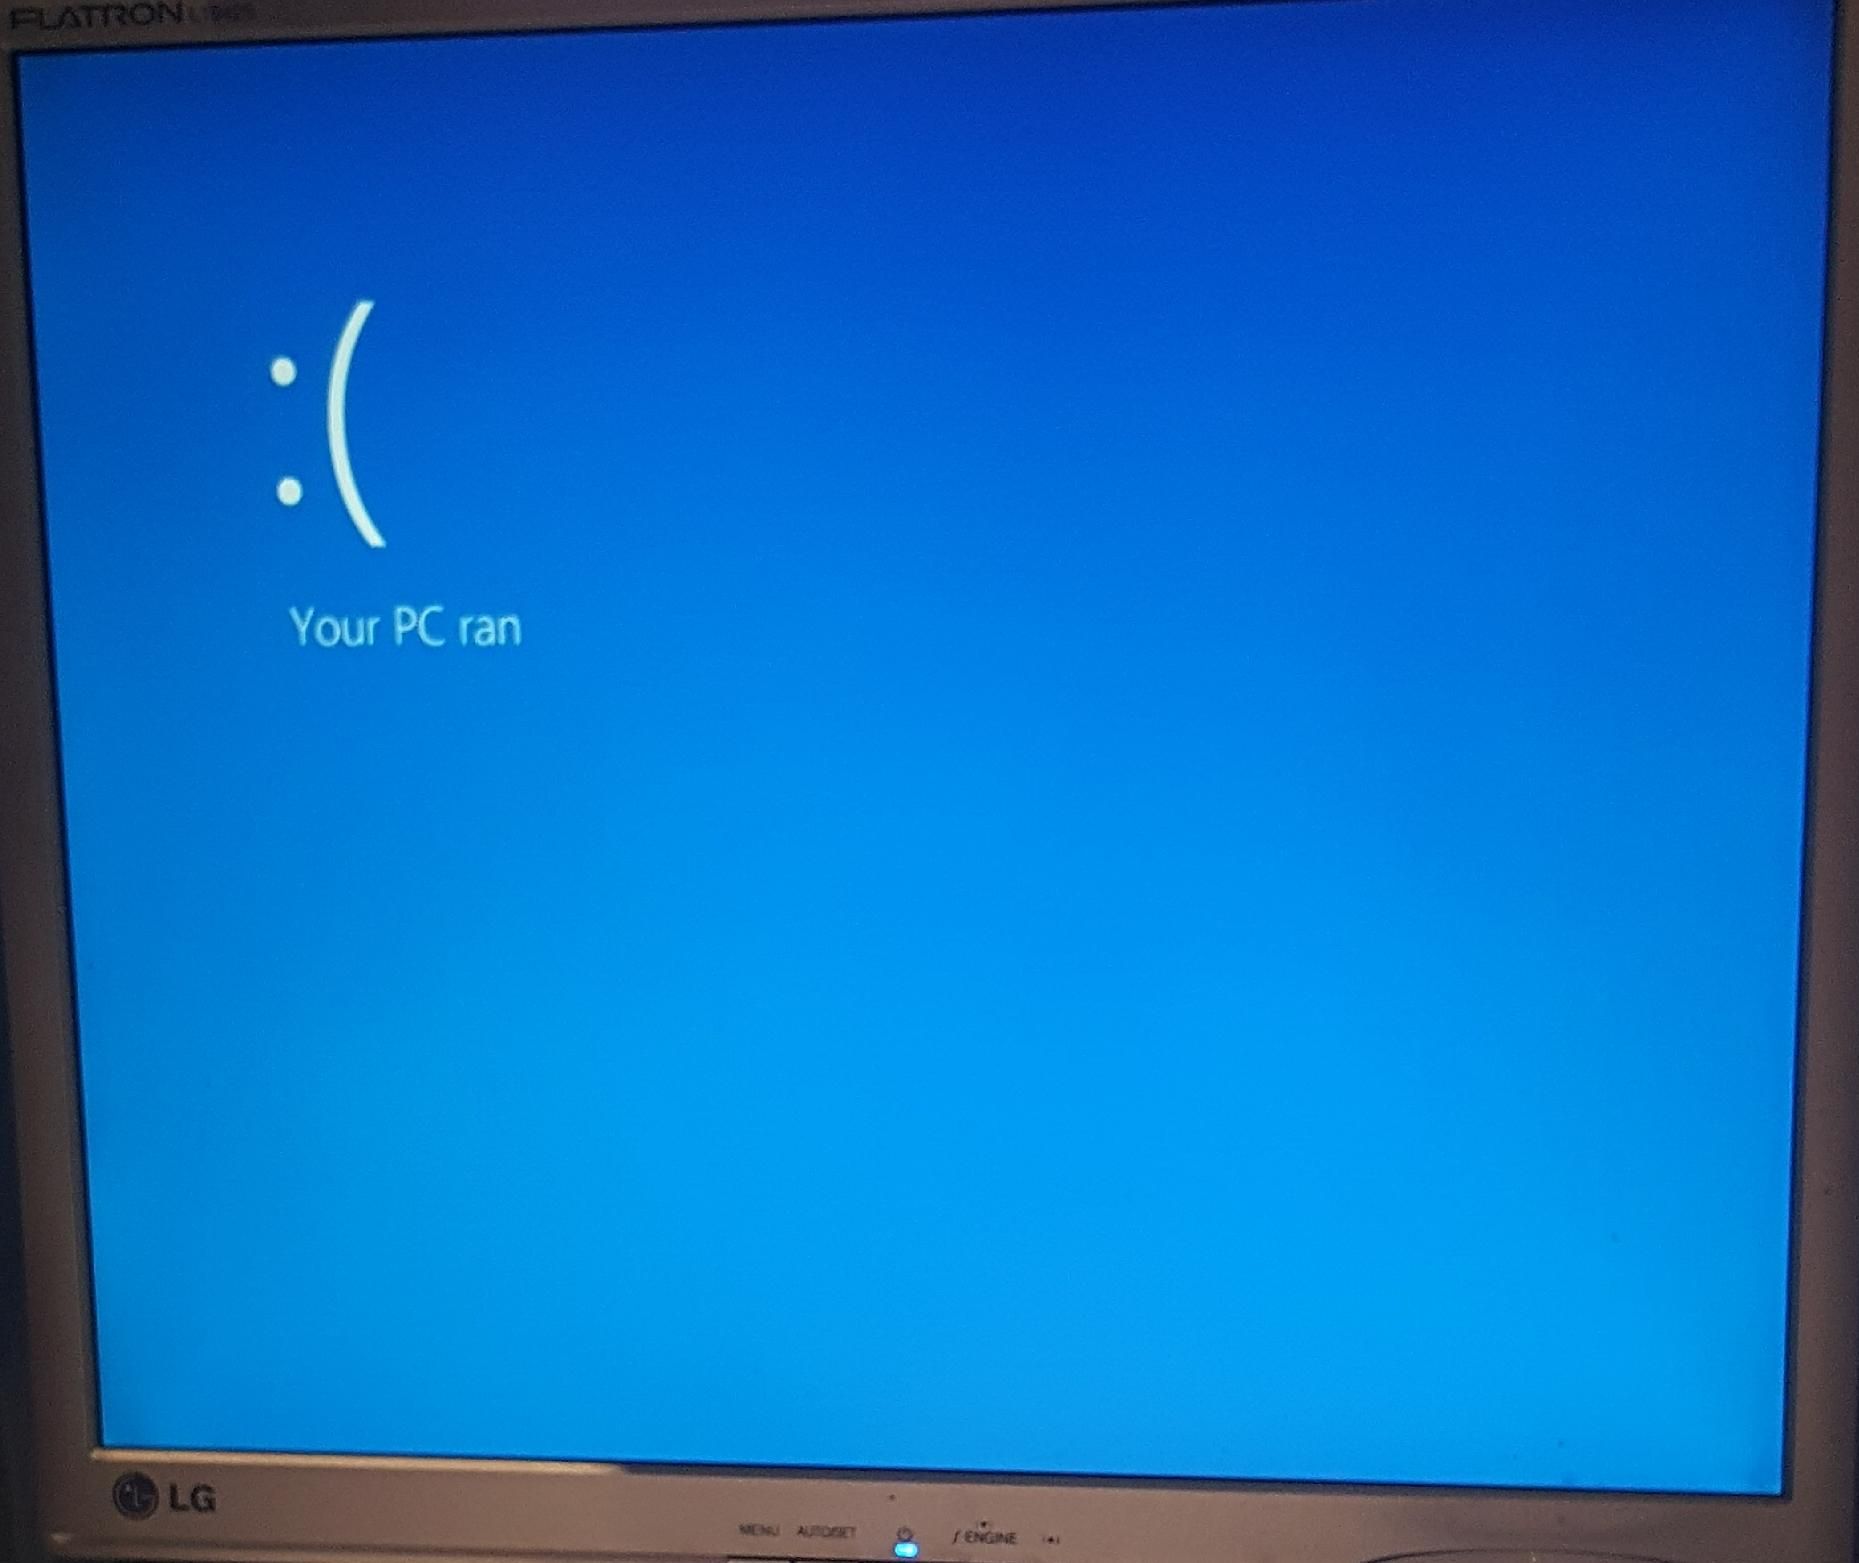 Aparently my computer broke so hard it decided to grow some legs and leave